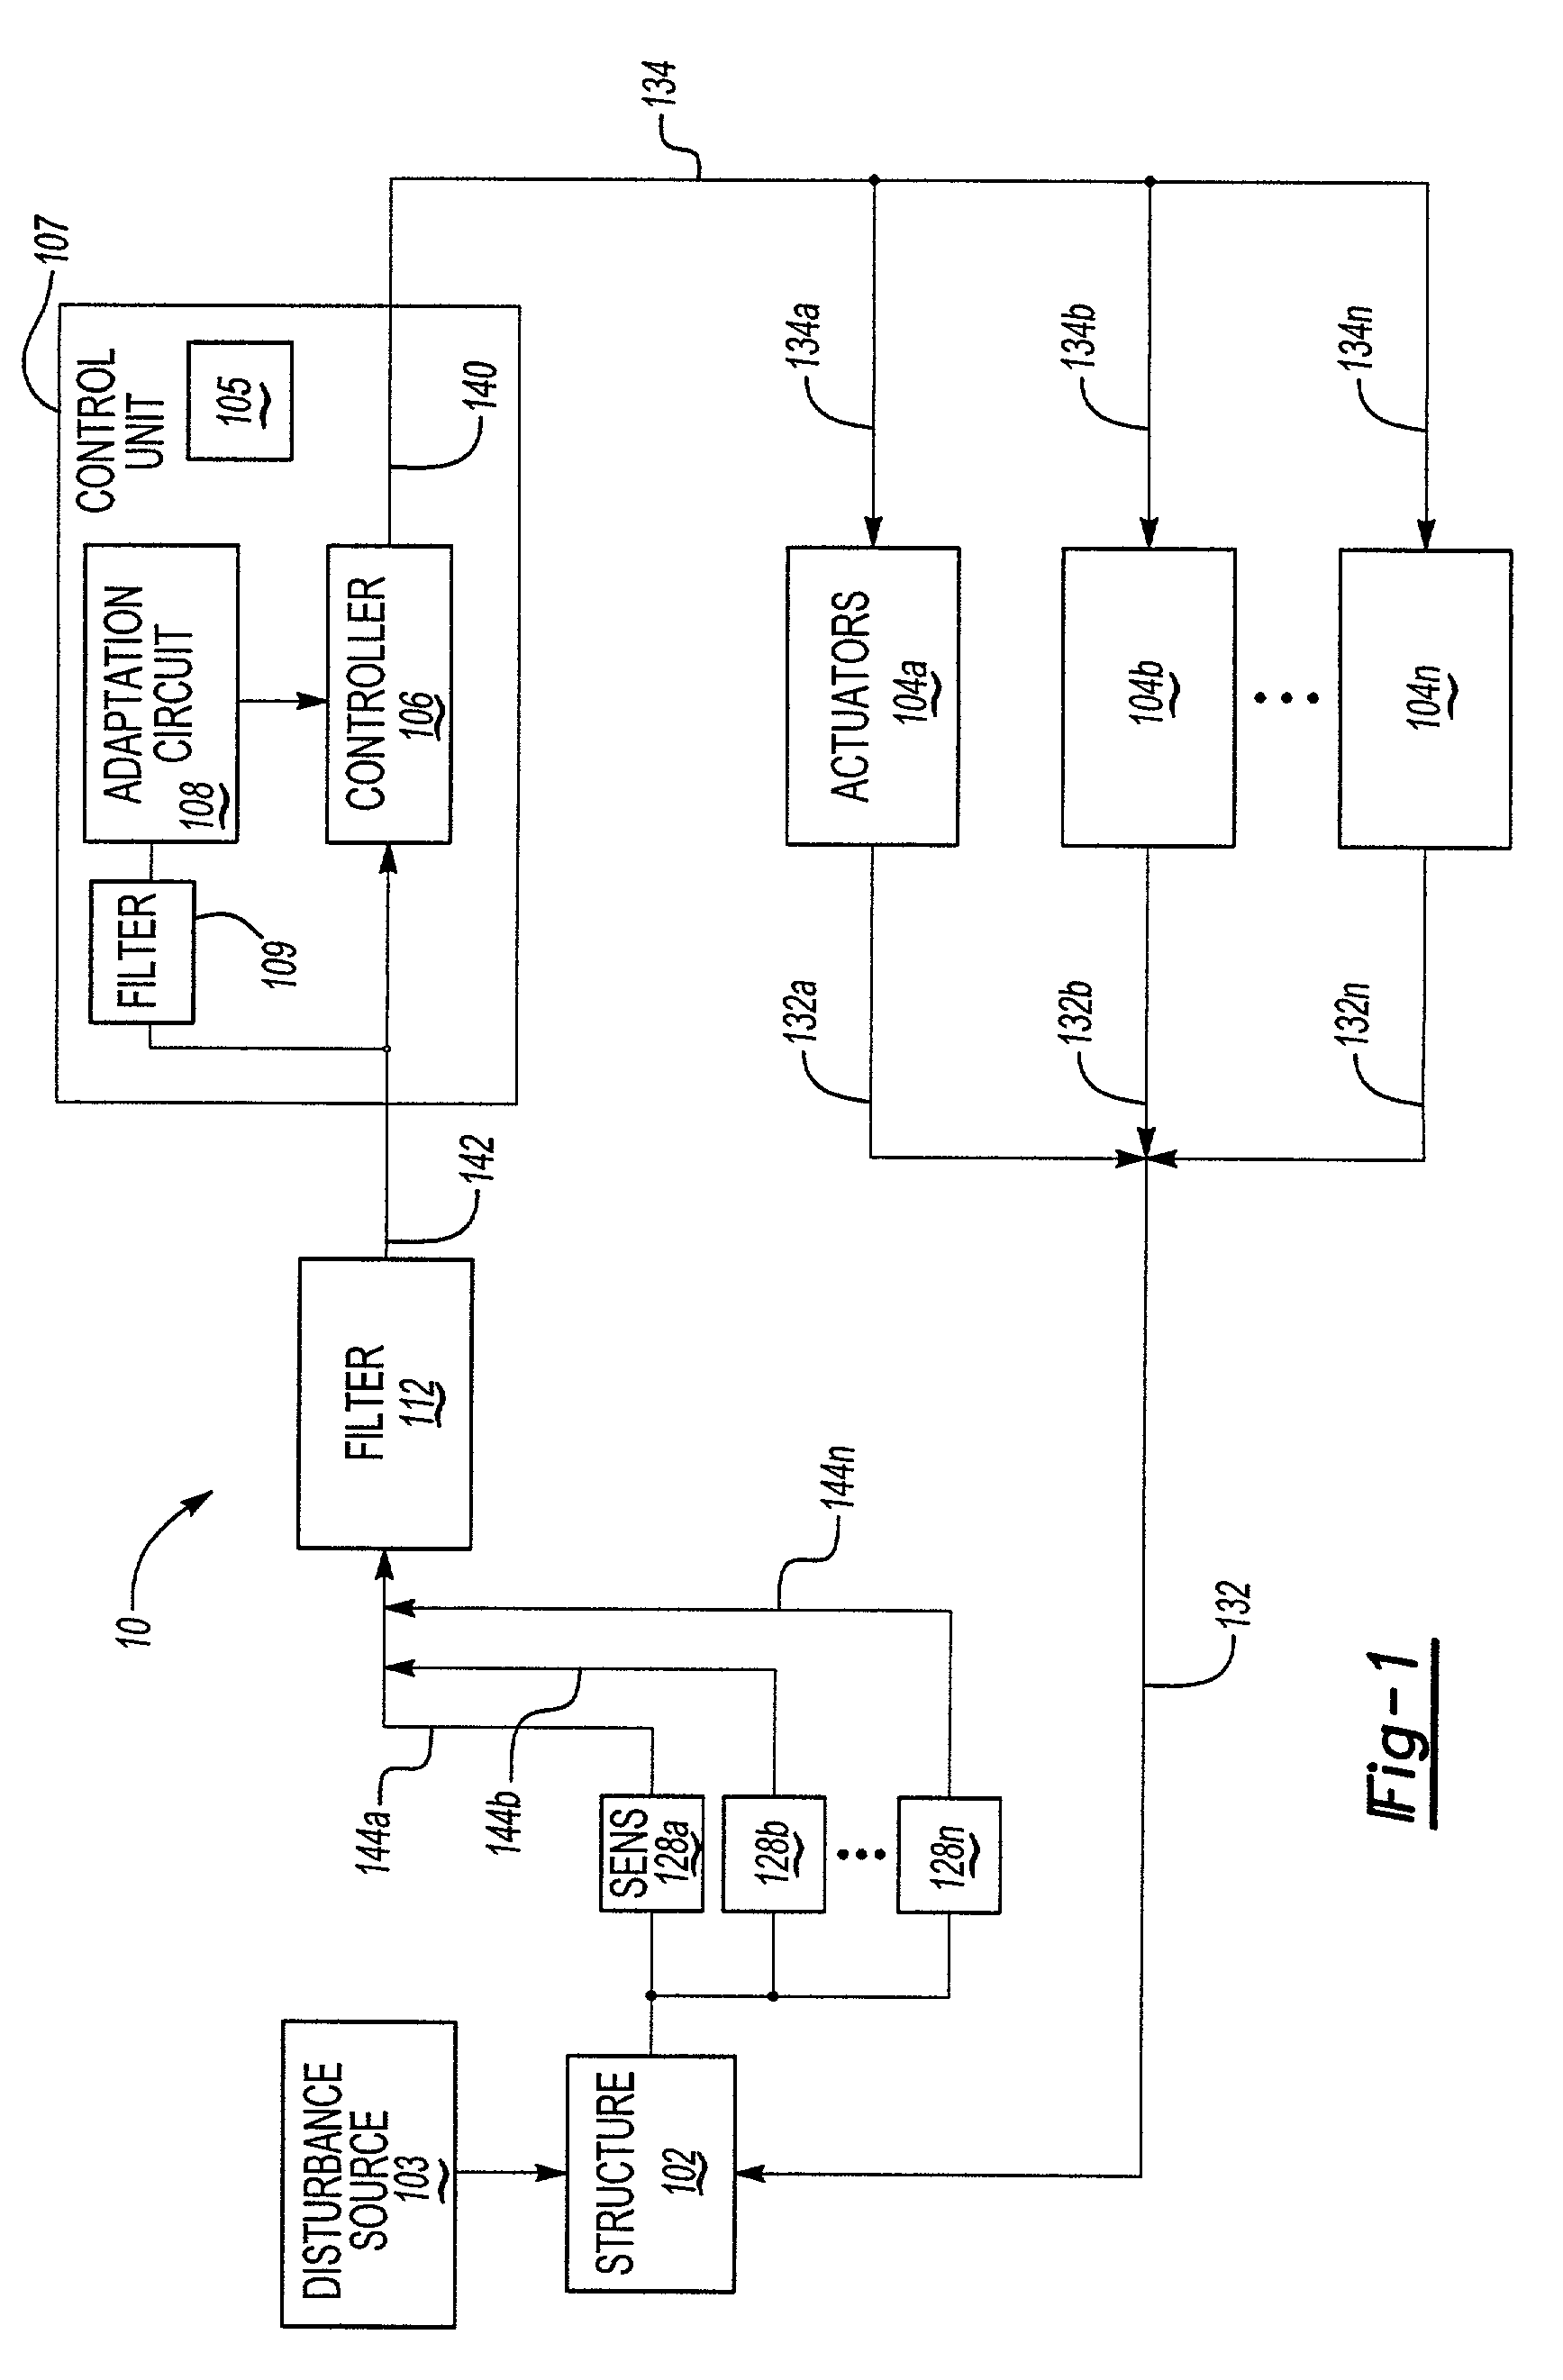 System for computationally efficient adaptation of active control of sound or vibration